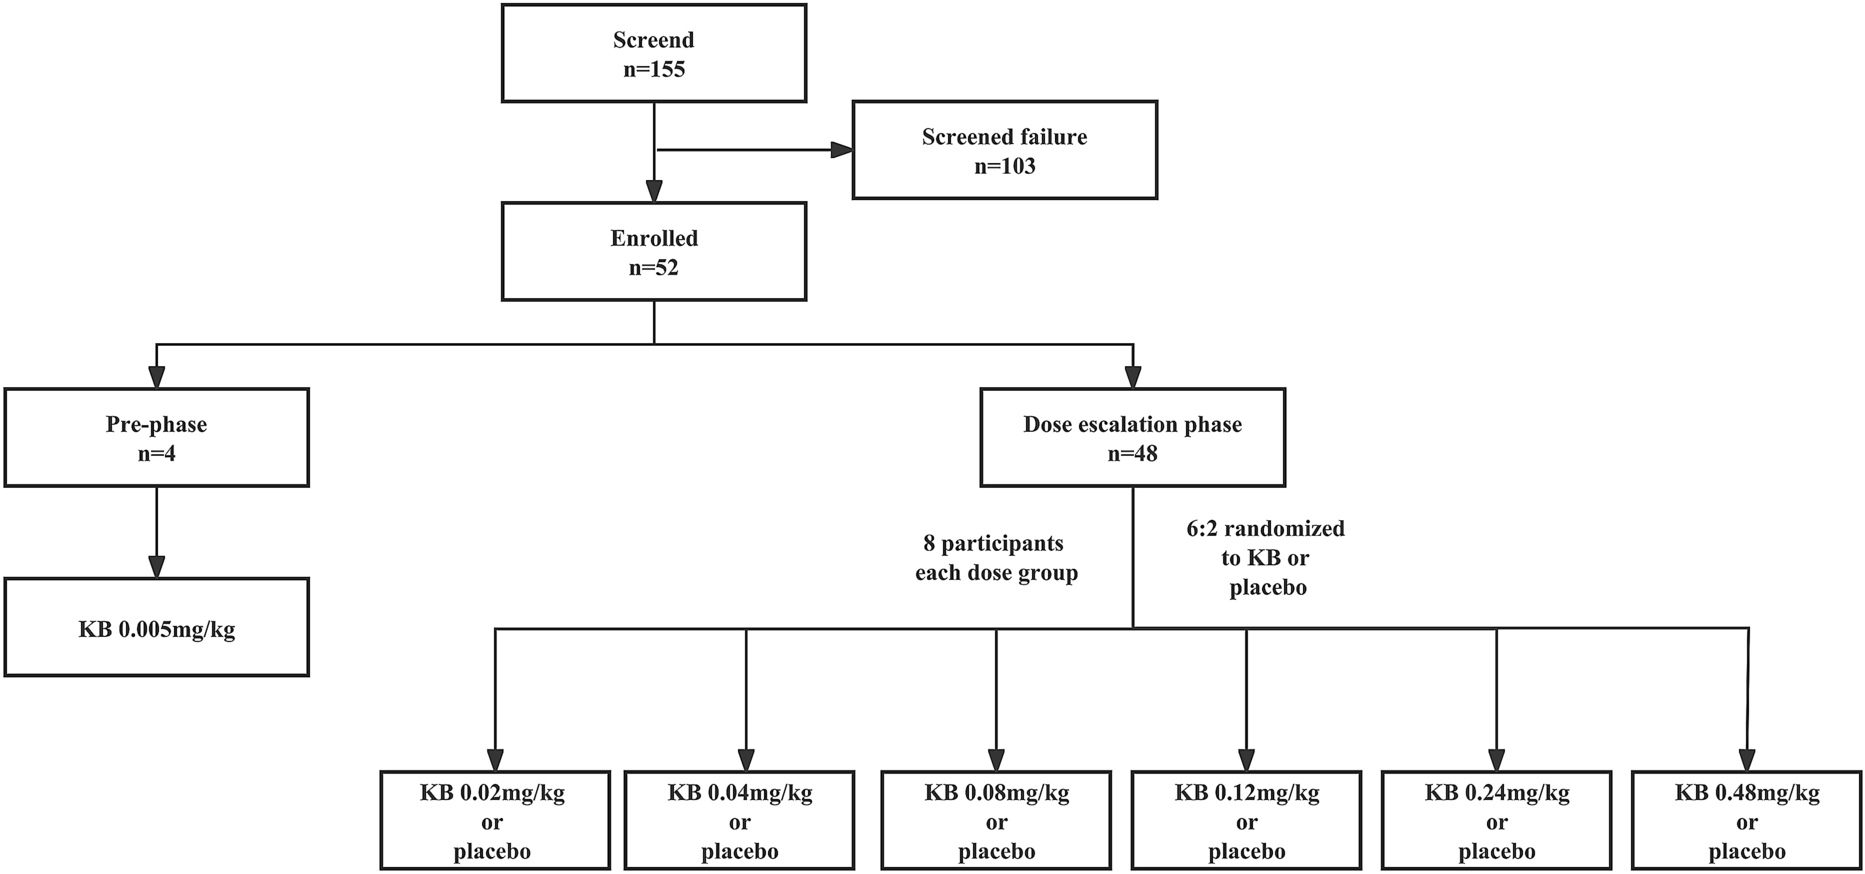 First-in-Human Safety, Tolerability, and Pharmacokinetics of Single-Dose Kukoamine B Mesylate in Healthy Subjects: A Randomized, Double-Blind, Placebo-Controlled Phase I Study